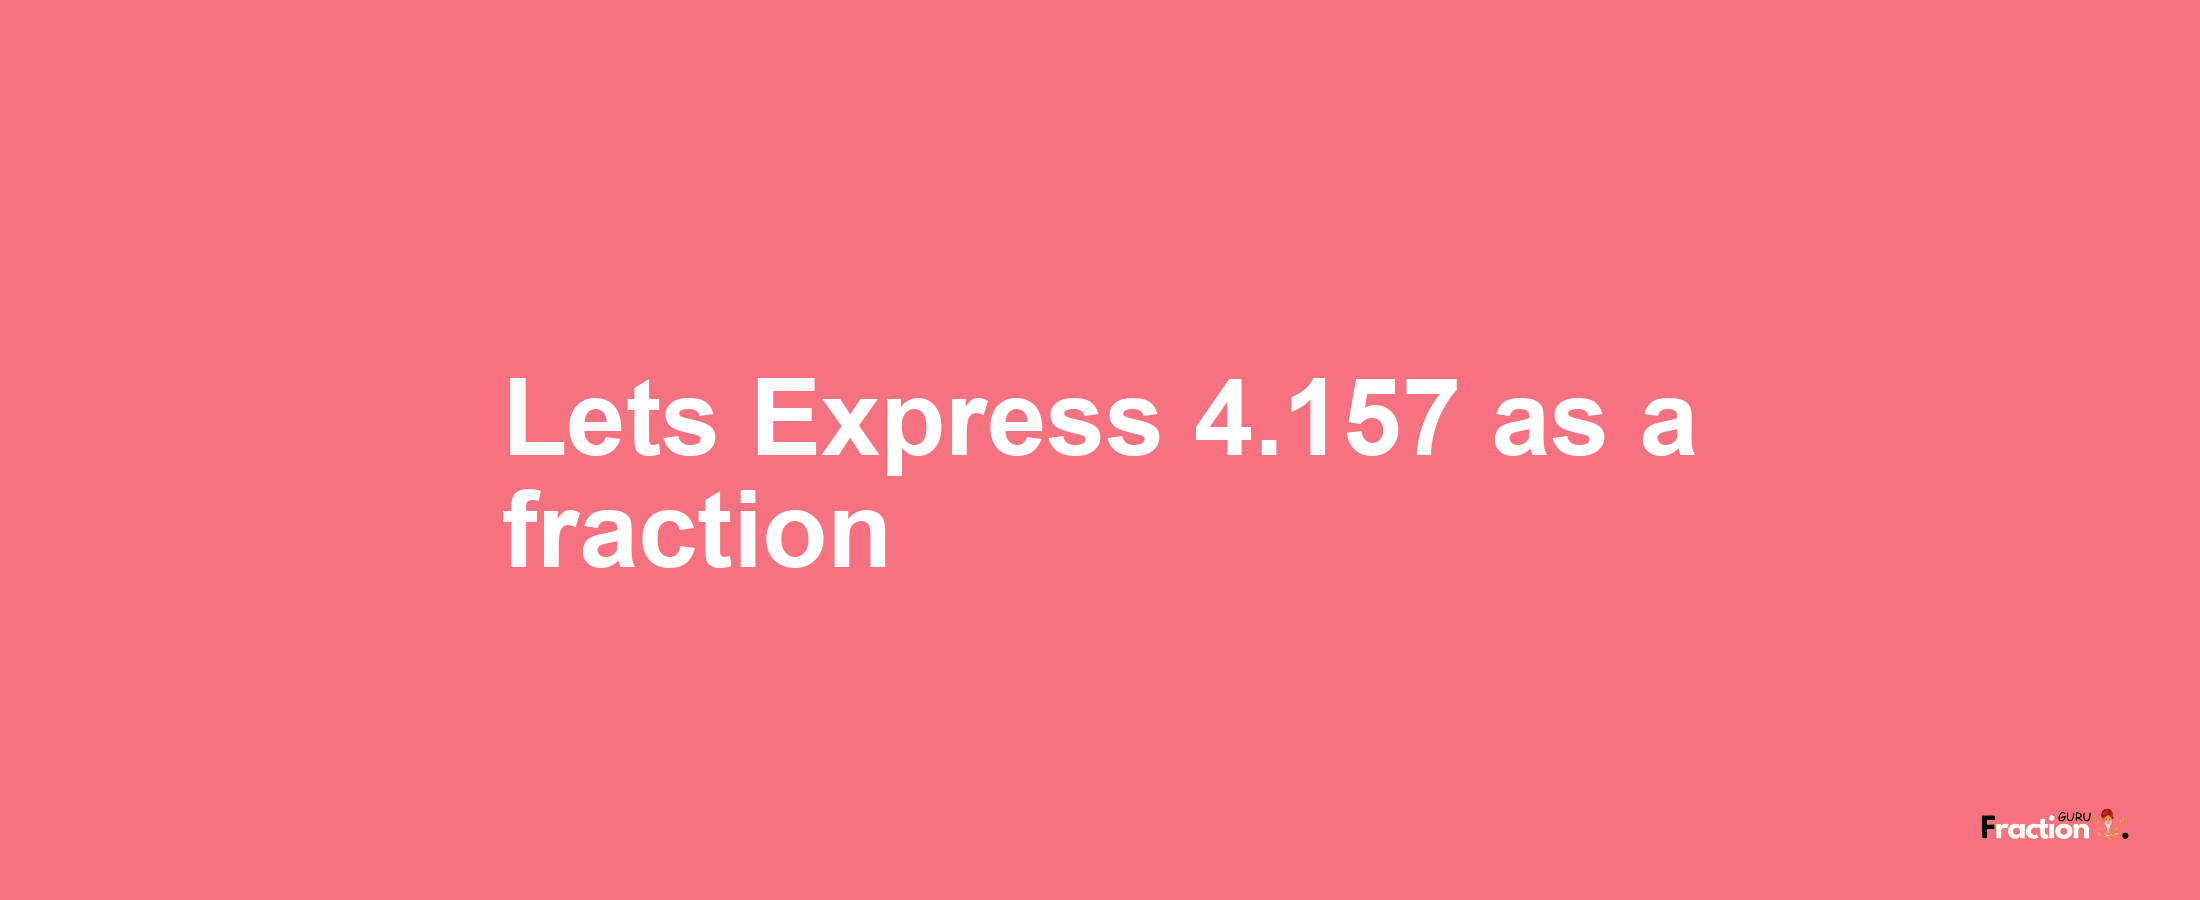 Lets Express 4.157 as afraction